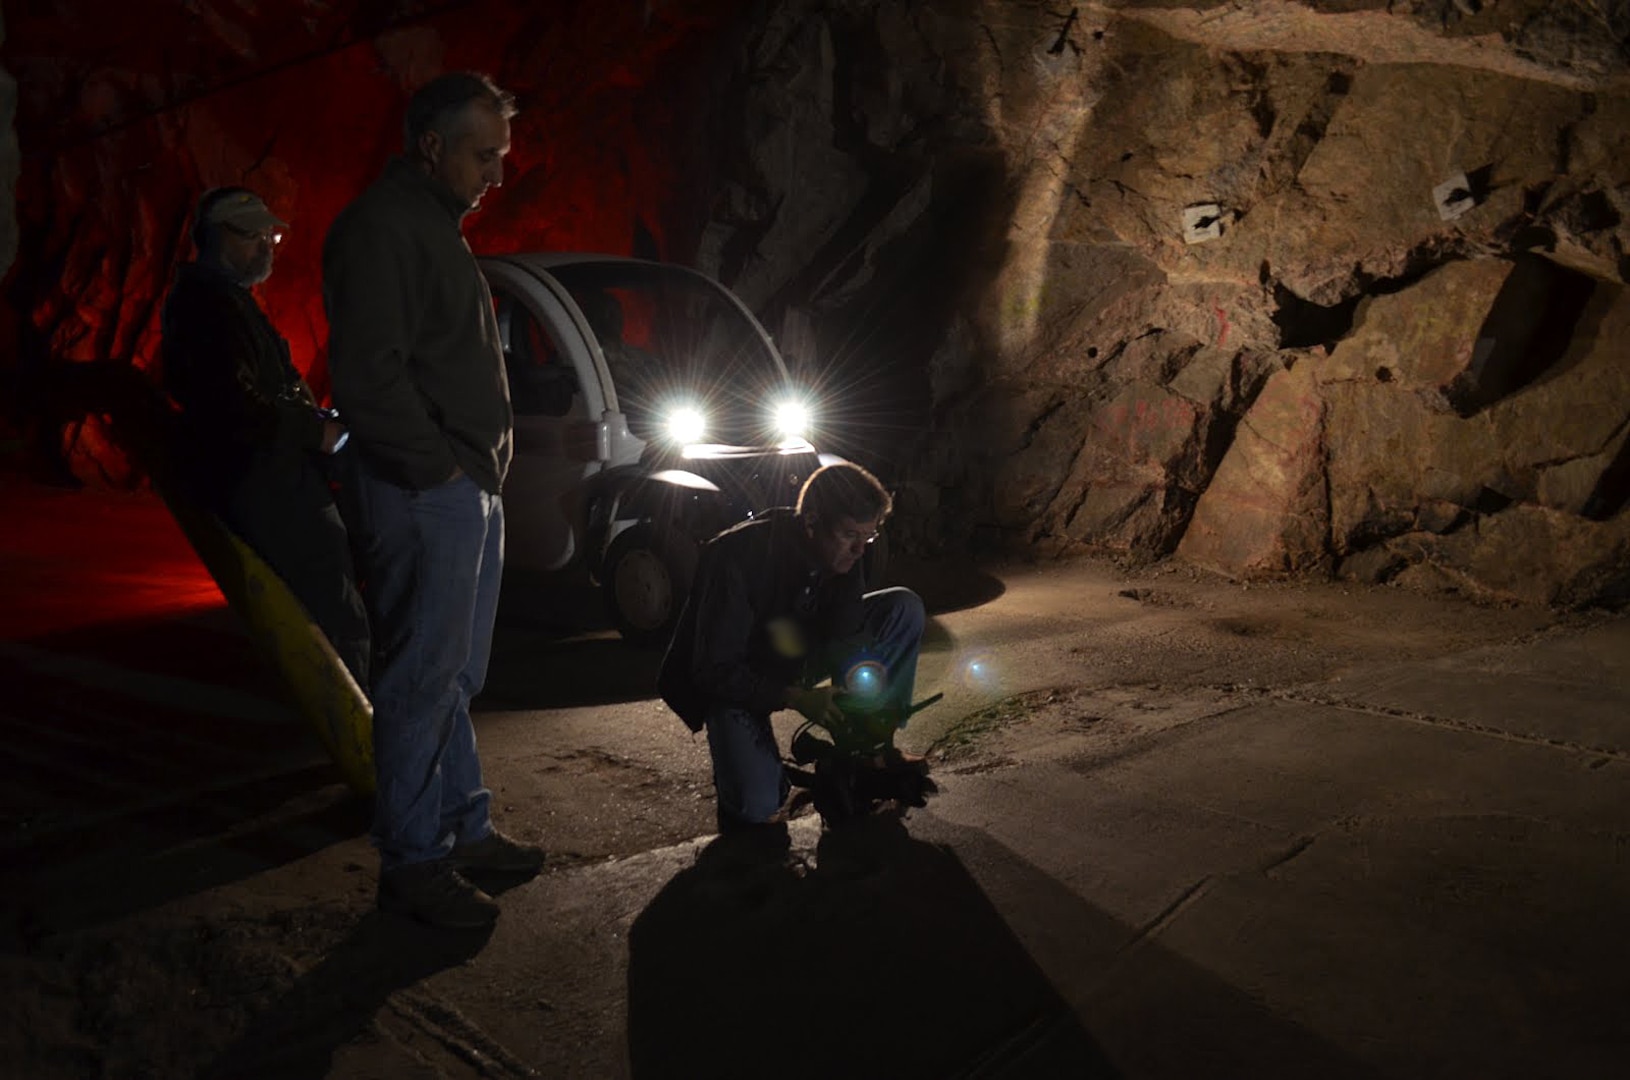 CHEYENNE MOUNTAIN AIR FORCE STATION, Colo. - Partisan Pictures’ cameraman Ben McCoy collects film footage in limited lighting within the tunnel leading to the south portal inside Cheyenne Mountain Air Force Station while producer Jonathan Grupper and sound specialist Thomas Wilson (left background) look on. Partisan Pictures captured film footage at Cheyenne Mountain Air Force Station for a documentary project during the second week of April 2012. The project also included rare footage of a multi-threat NORAD and USNORTHCOM exercise in the Alternate Command Center. 

(Canadian Forces photo by Lt. Alain Blondin) 

